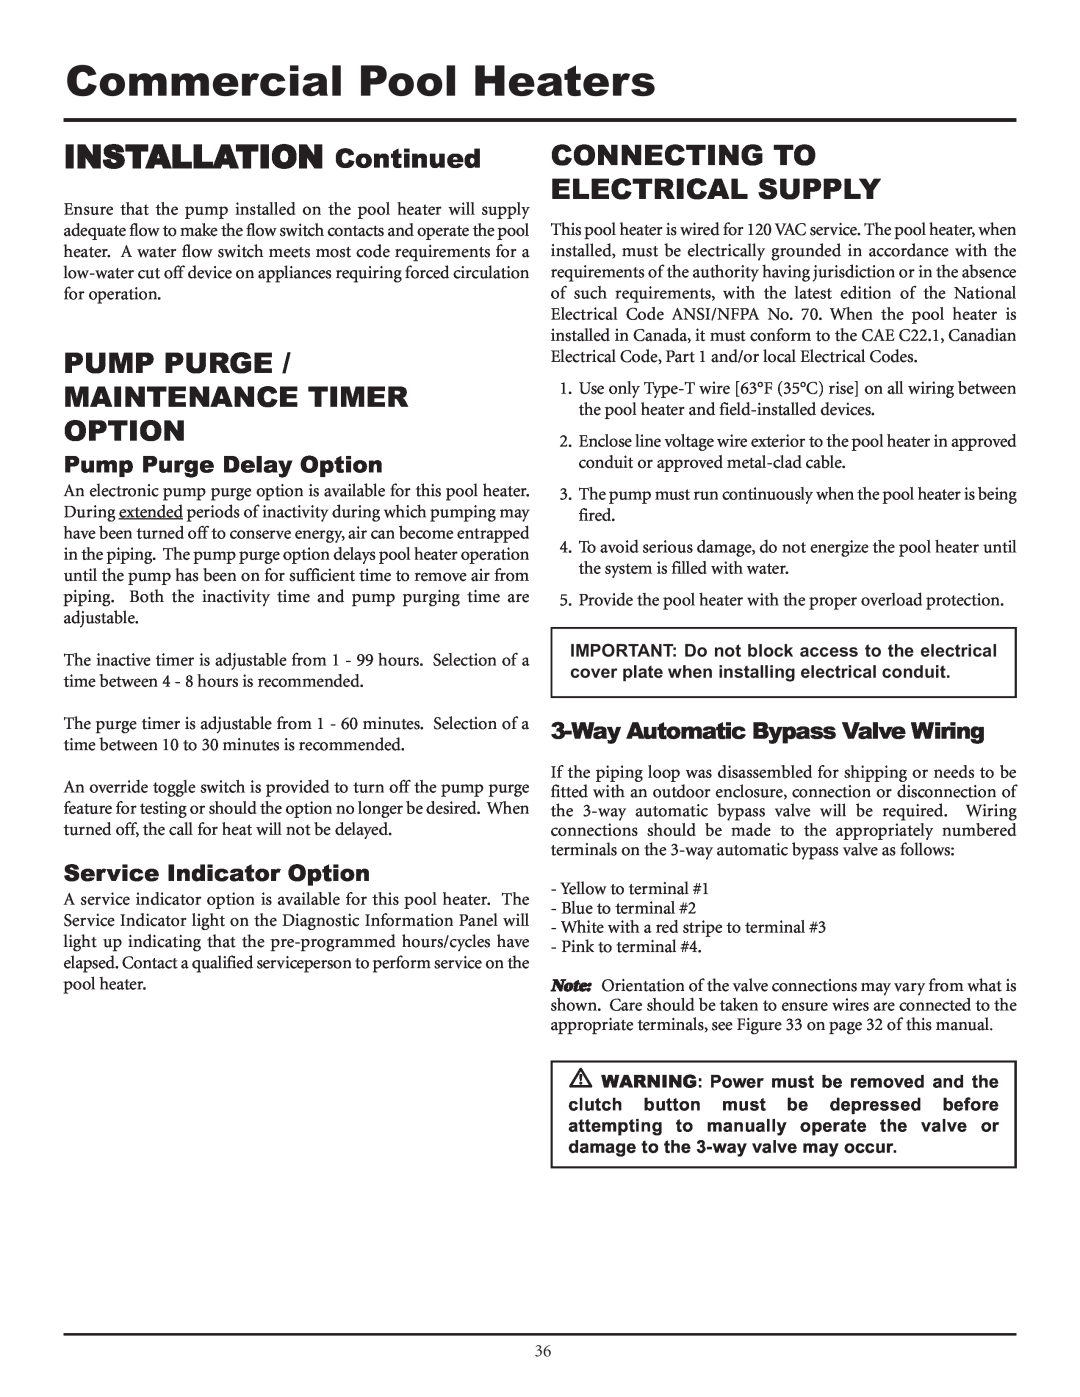 Lochinvar F0600187510 Pump Purge Maintenance Timer Option, Connecting To Electrical Supply, Pump Purge Delay Option 